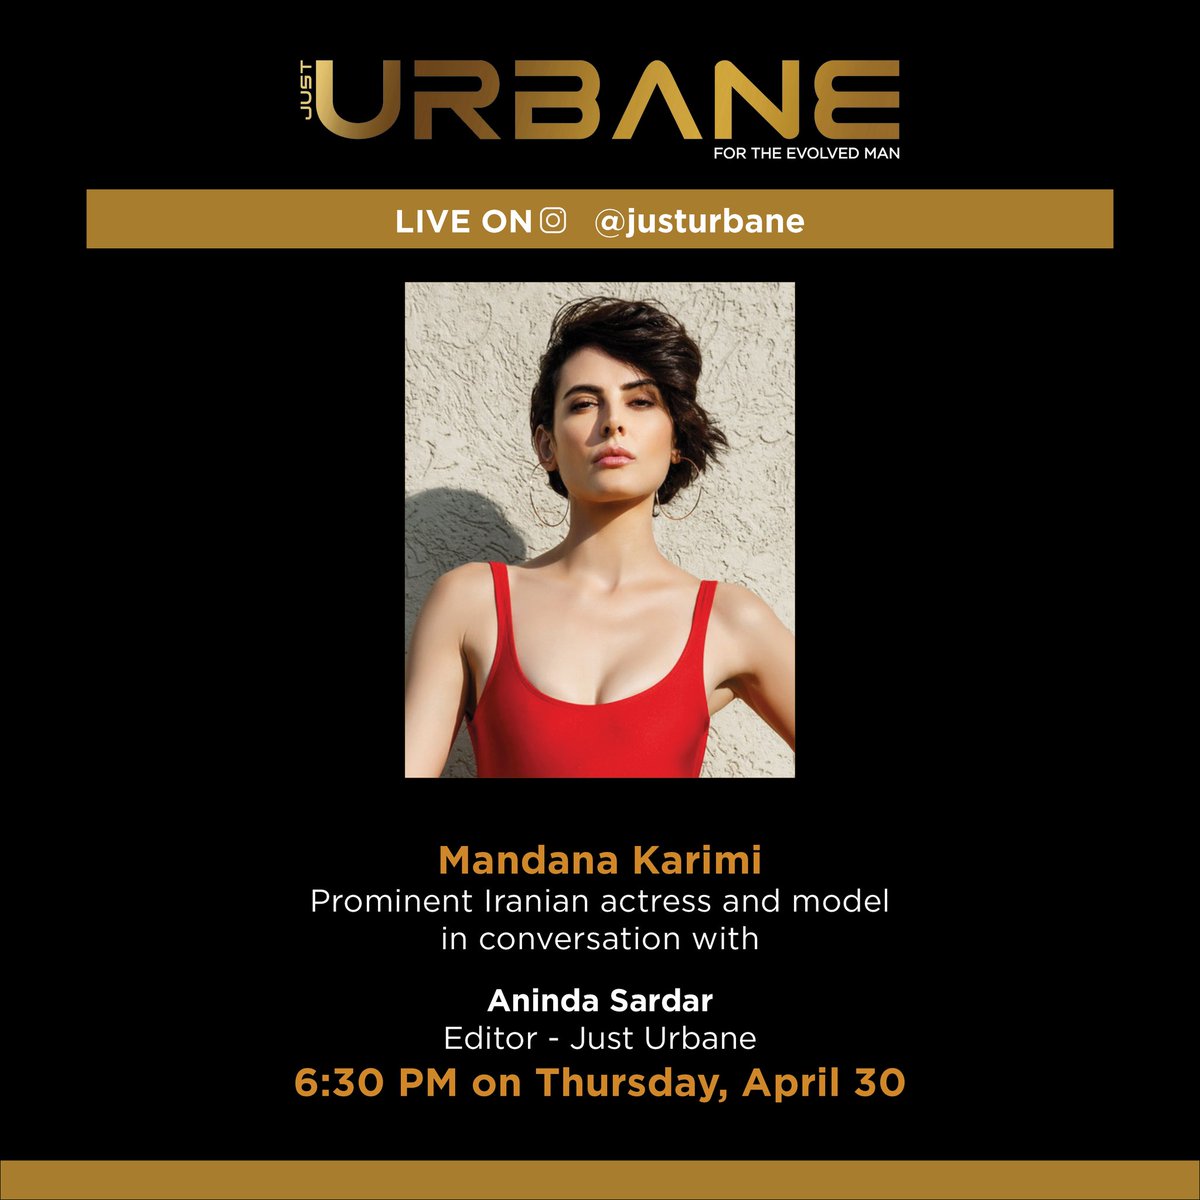 Tomorrow we have the prominent Iranian actress and model Mandana Karimi (@manizhe) live in conversation with Aninda Sardar (@anindasardar) at 6.30pm
Follow our Instagram page @justurbane to join the live conversation

@UrbaneJets

#justurbane #evolvedman #mandanakarimi #instalive